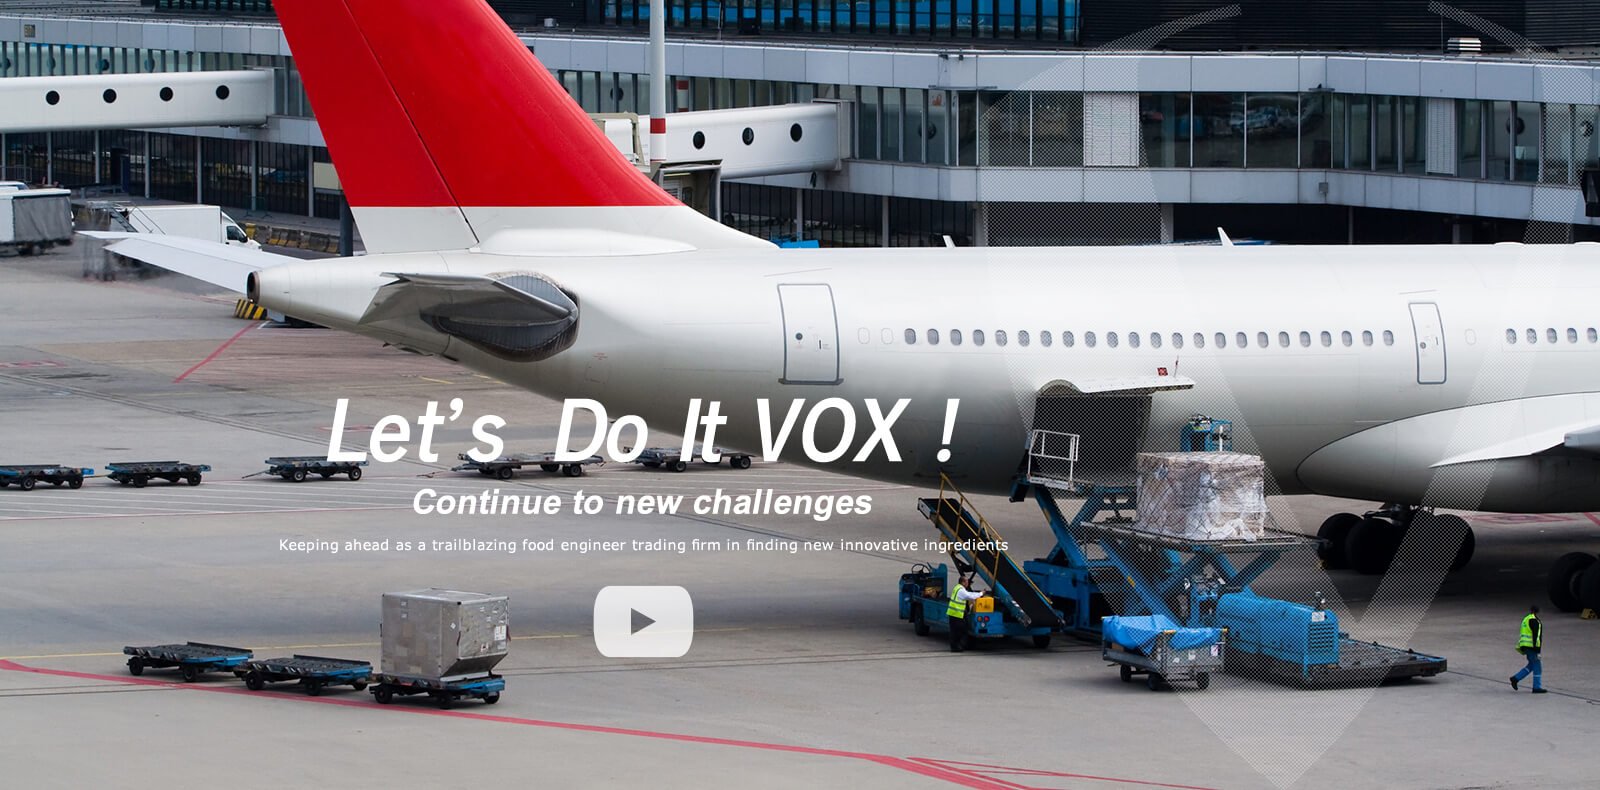 Let's Get It Done VOX! Continue to new challenges. Keeping ahead as a pioneering Food Engineering company in finding new innovative ingredients.